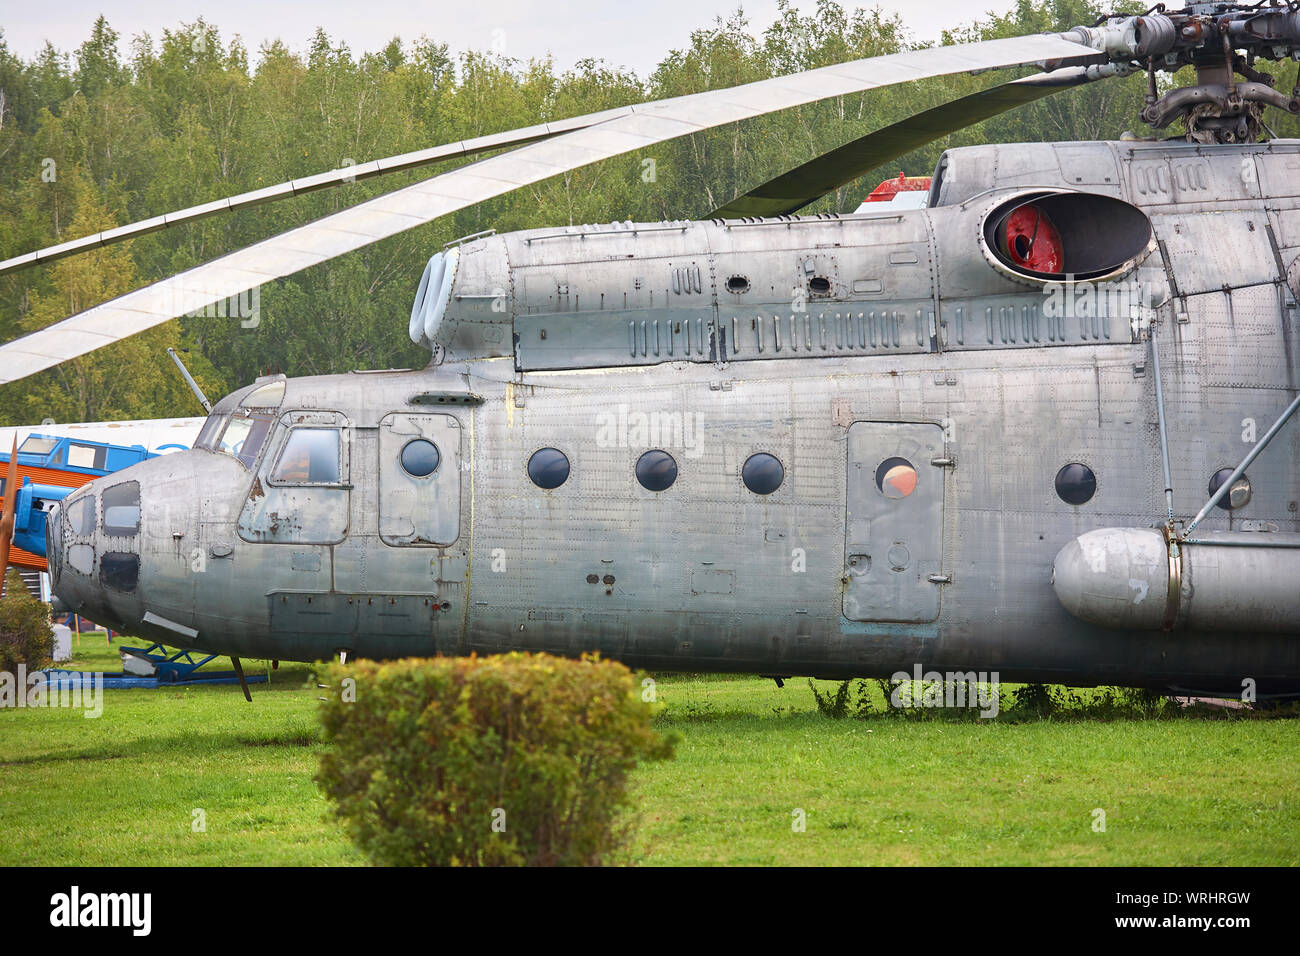 An old military helicopter painted gray closeup. Stock Photo